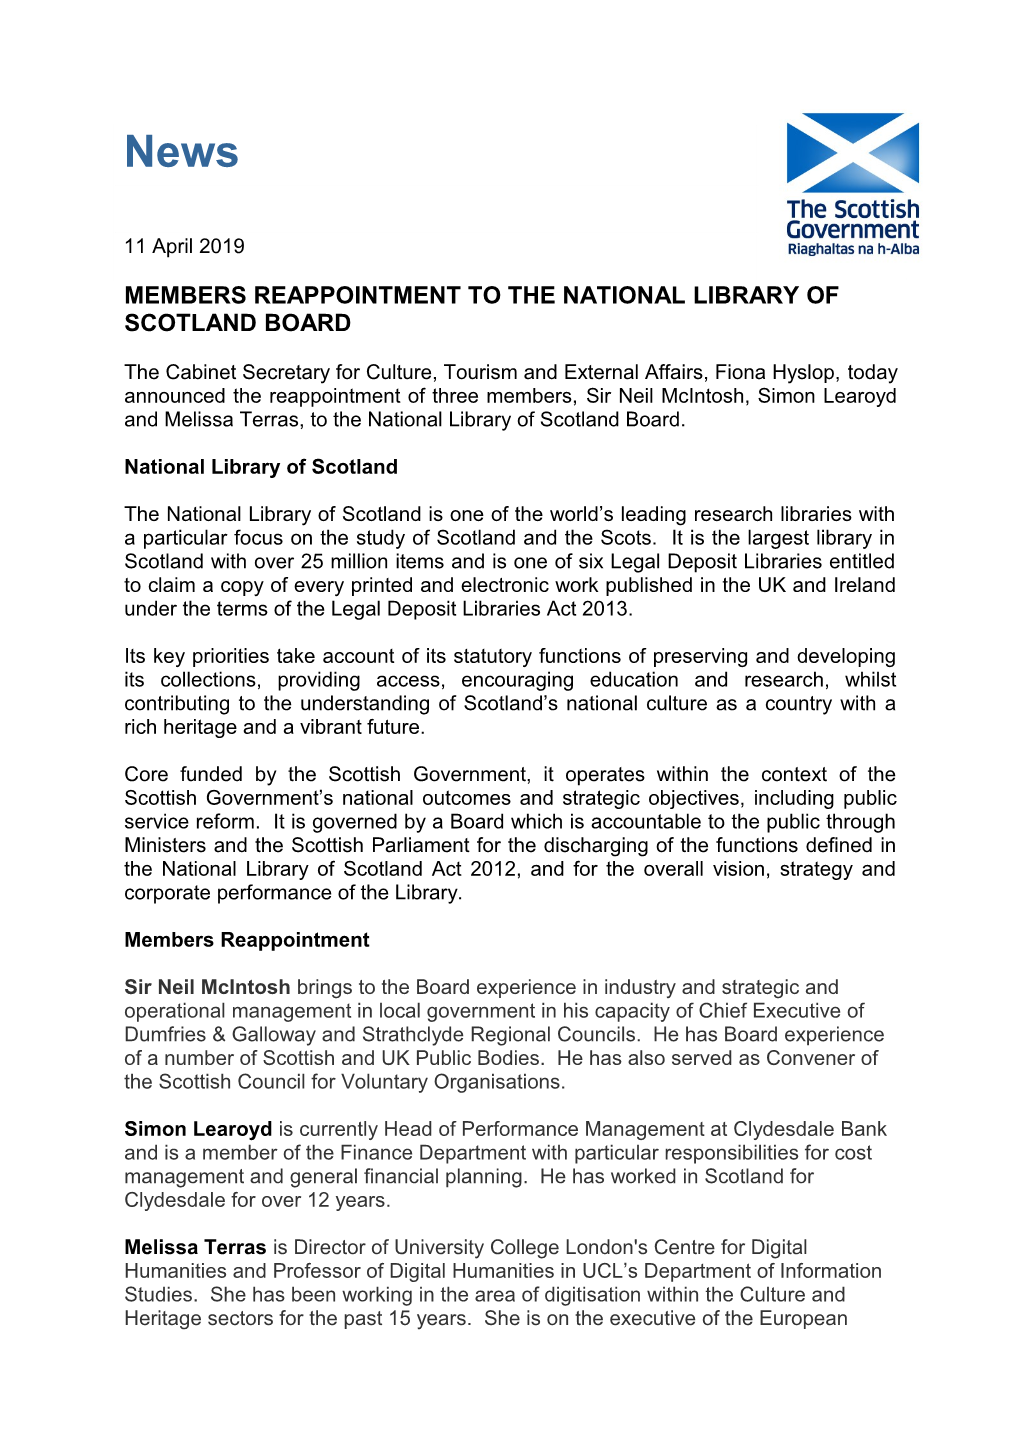 Members Reappointment to the National Library of Scotland Board